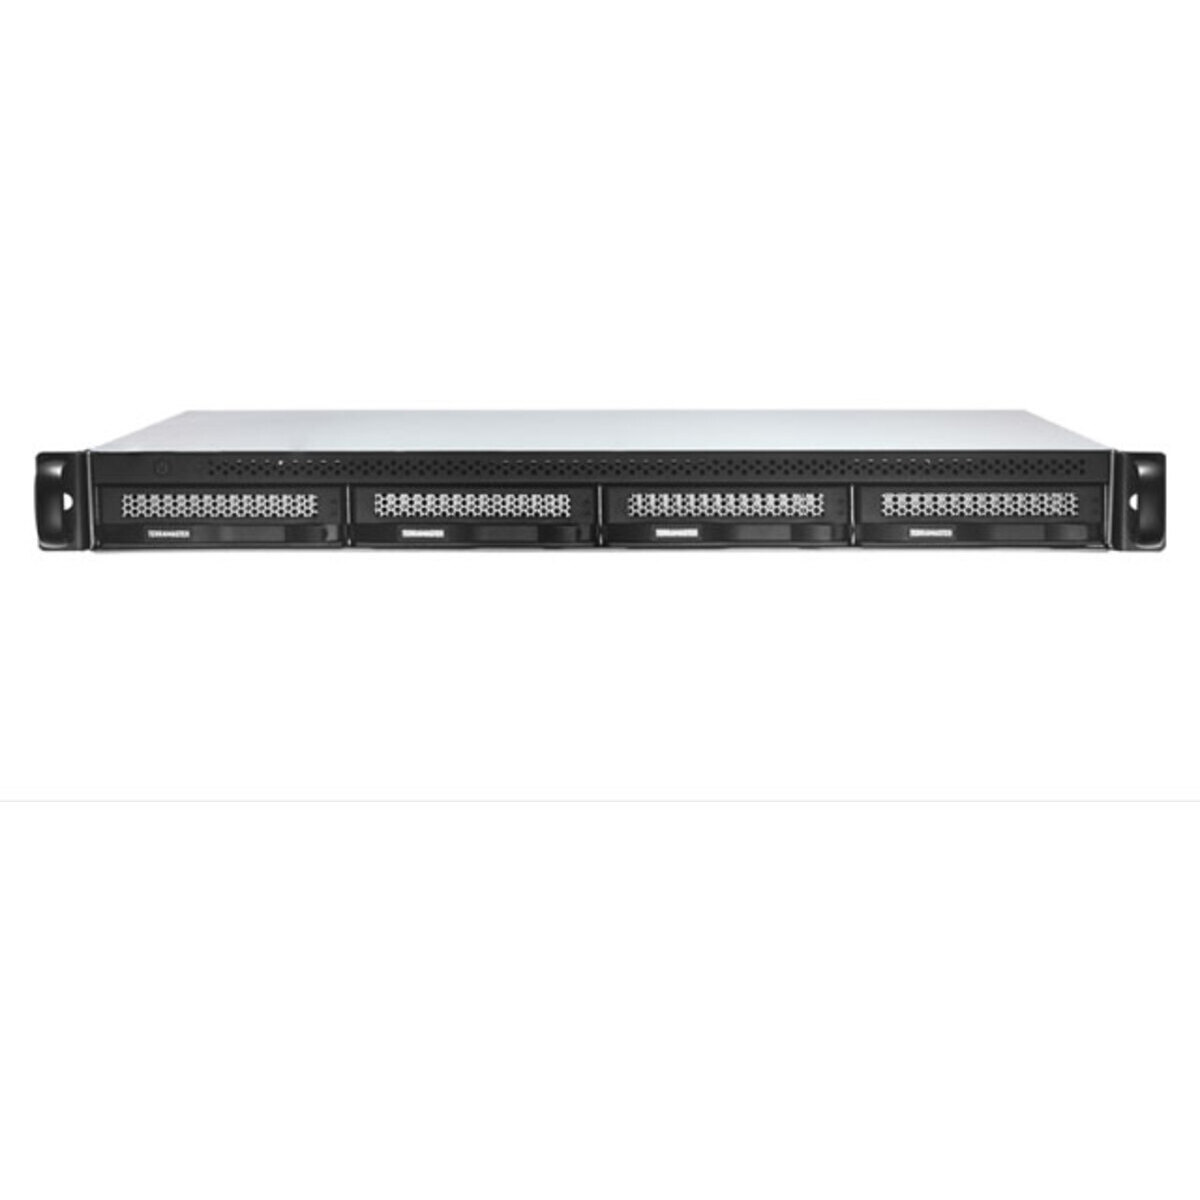 TerraMaster U4-423 18tb 4-Bay RackMount Multimedia / Power User / Business NAS - Network Attached Storage Device 3x6tb Seagate EXOS 7E10 ST6000NM019B 3.5 7200rpm SATA 6Gb/s HDD ENTERPRISE Class Drives Installed - Burn-In Tested - FREE RAM UPGRADE U4-423